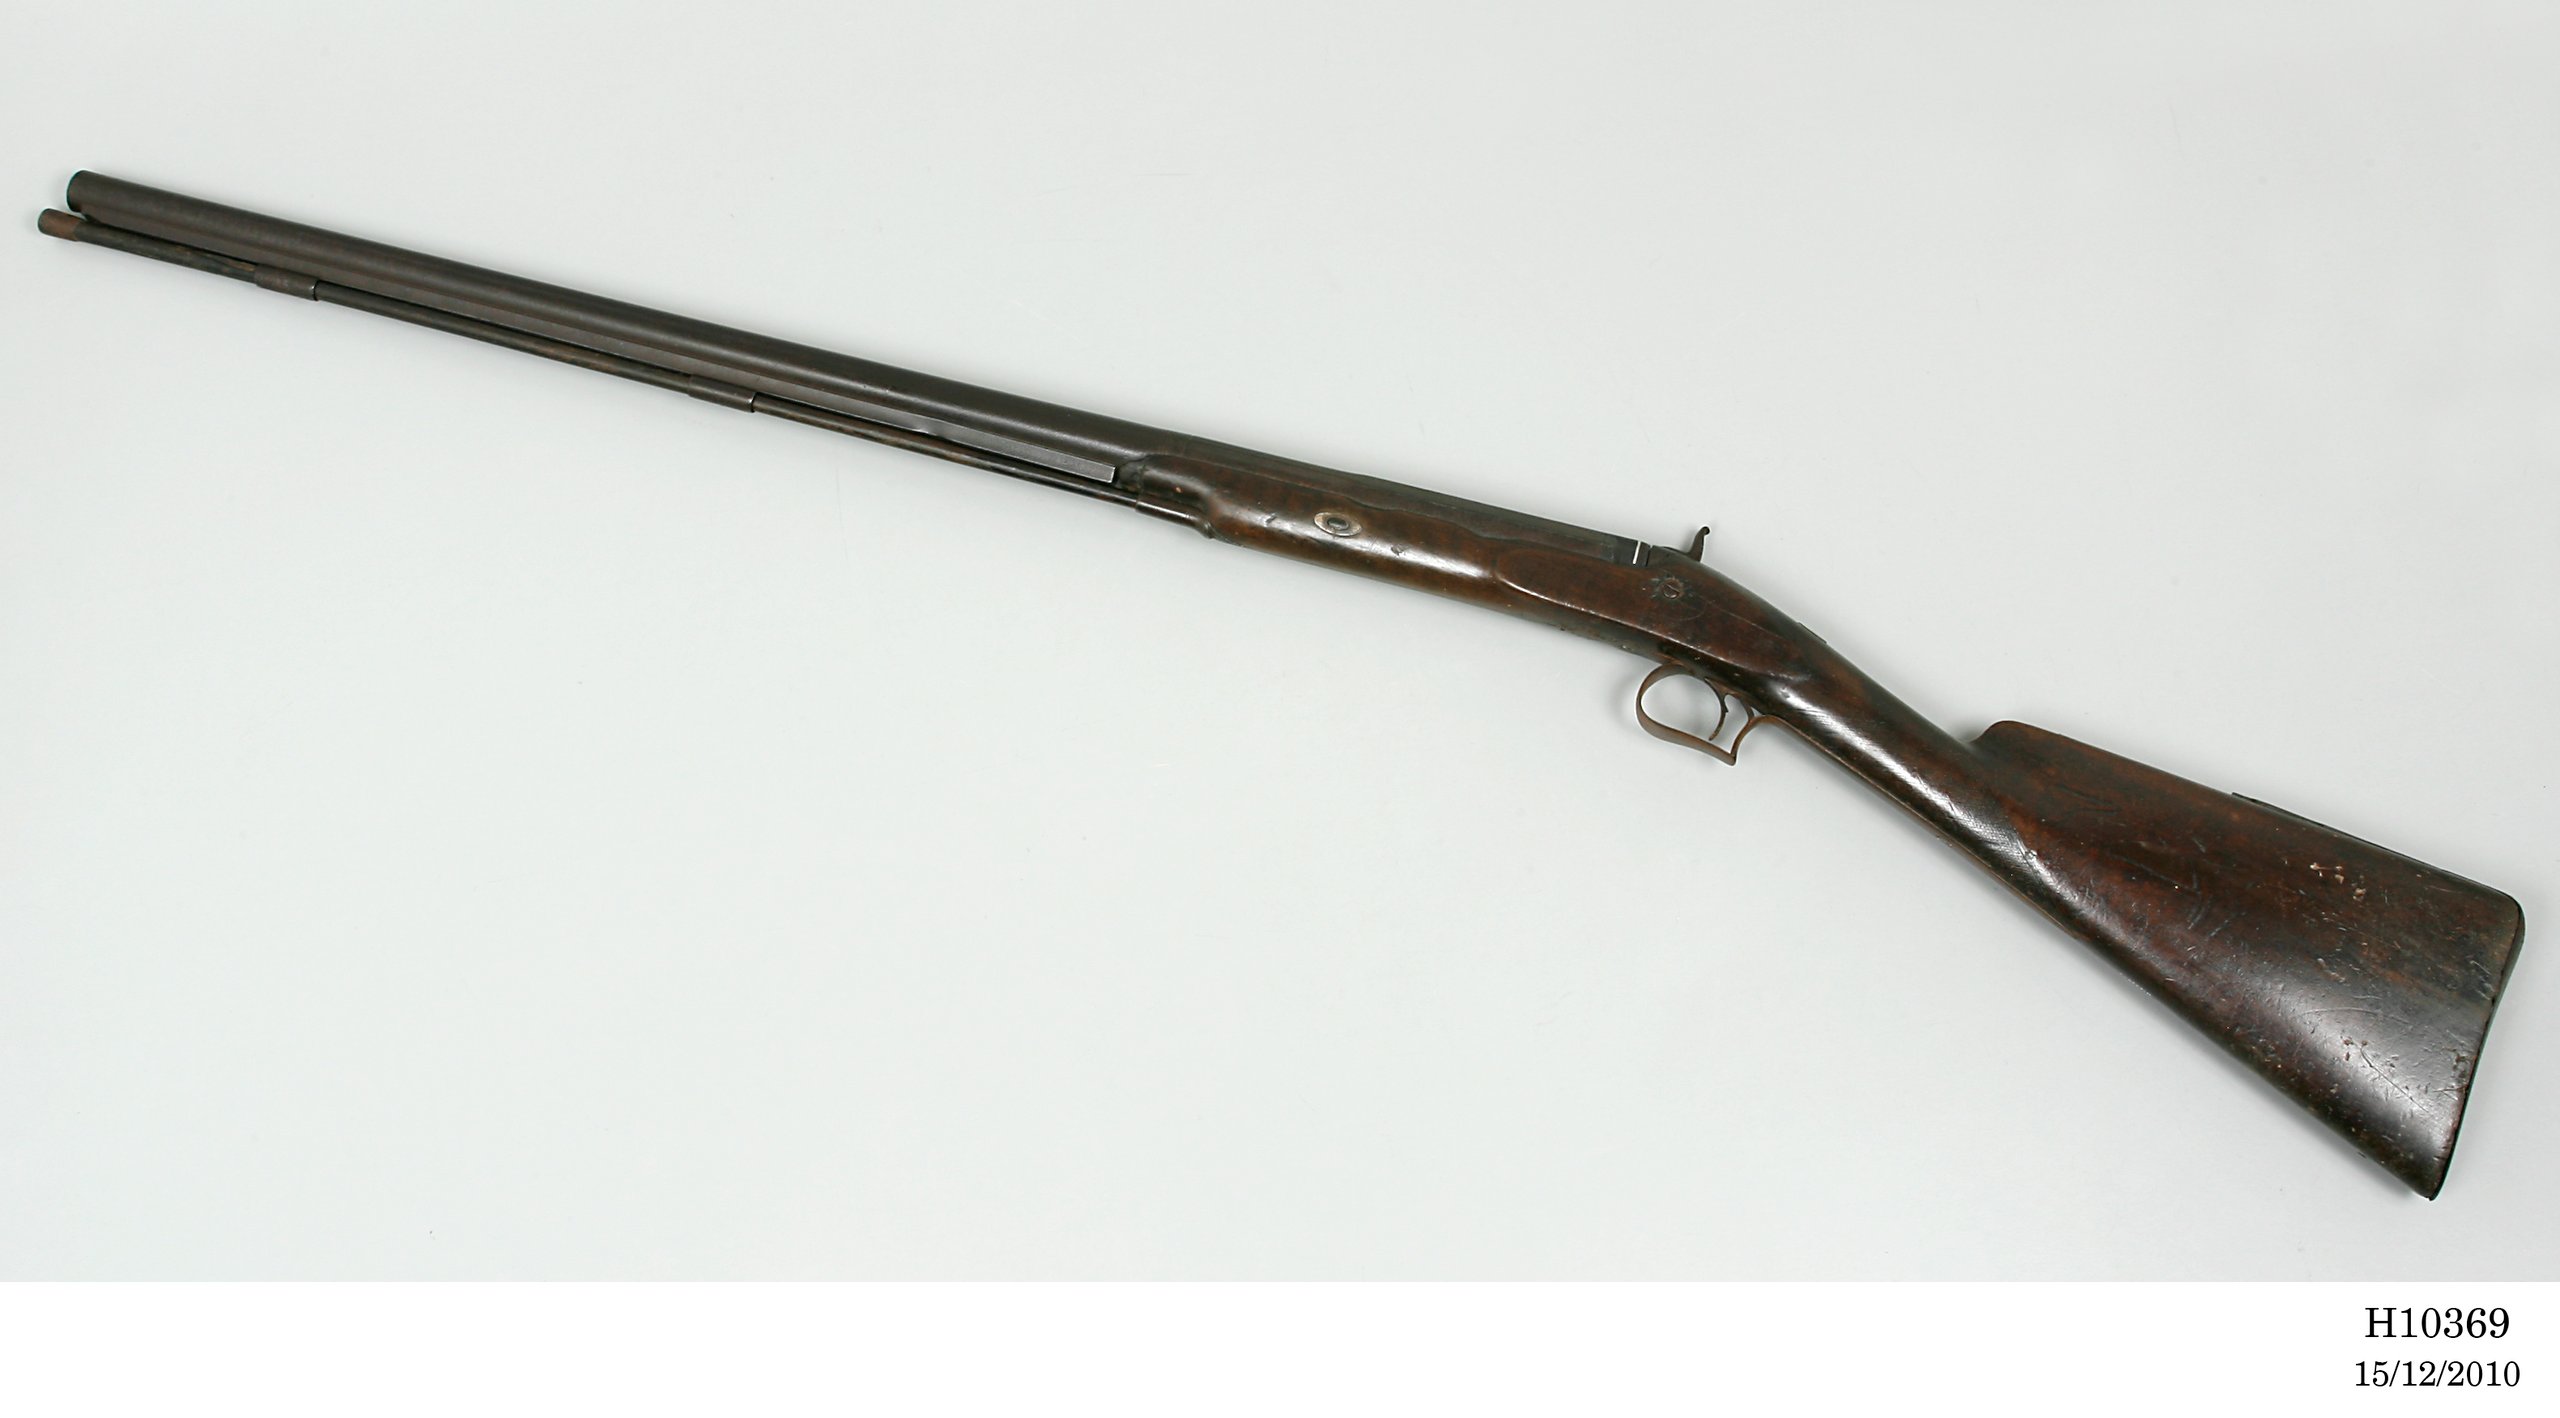 Percussion shotgun possibly owned by William Charles Wentworth